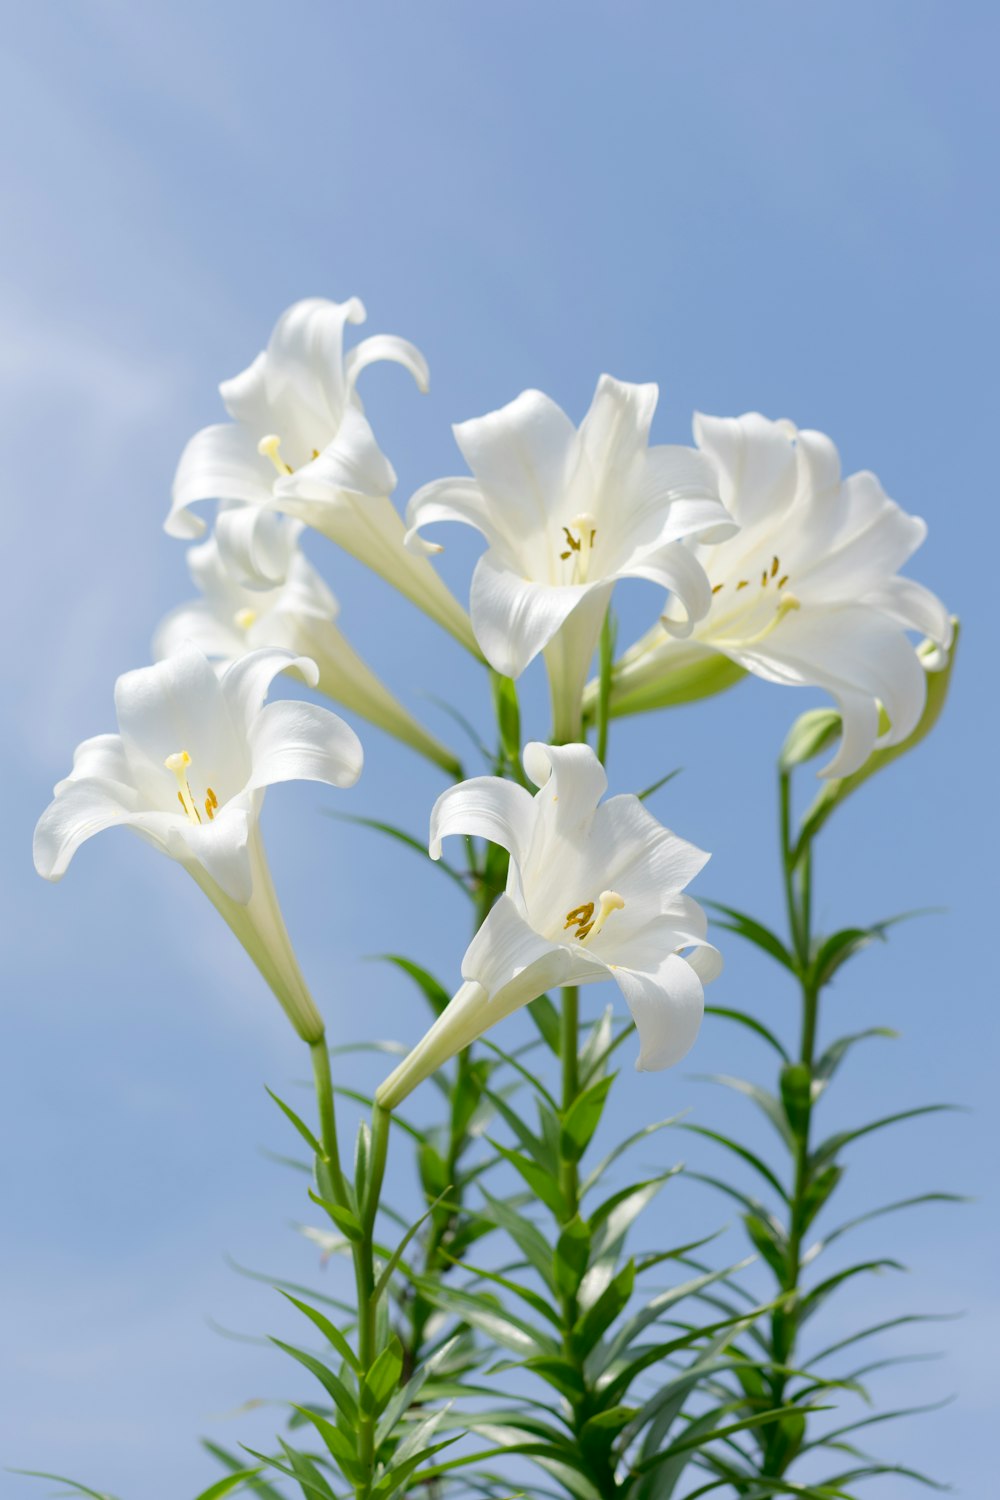 a group of white flowers with a blue sky in the background